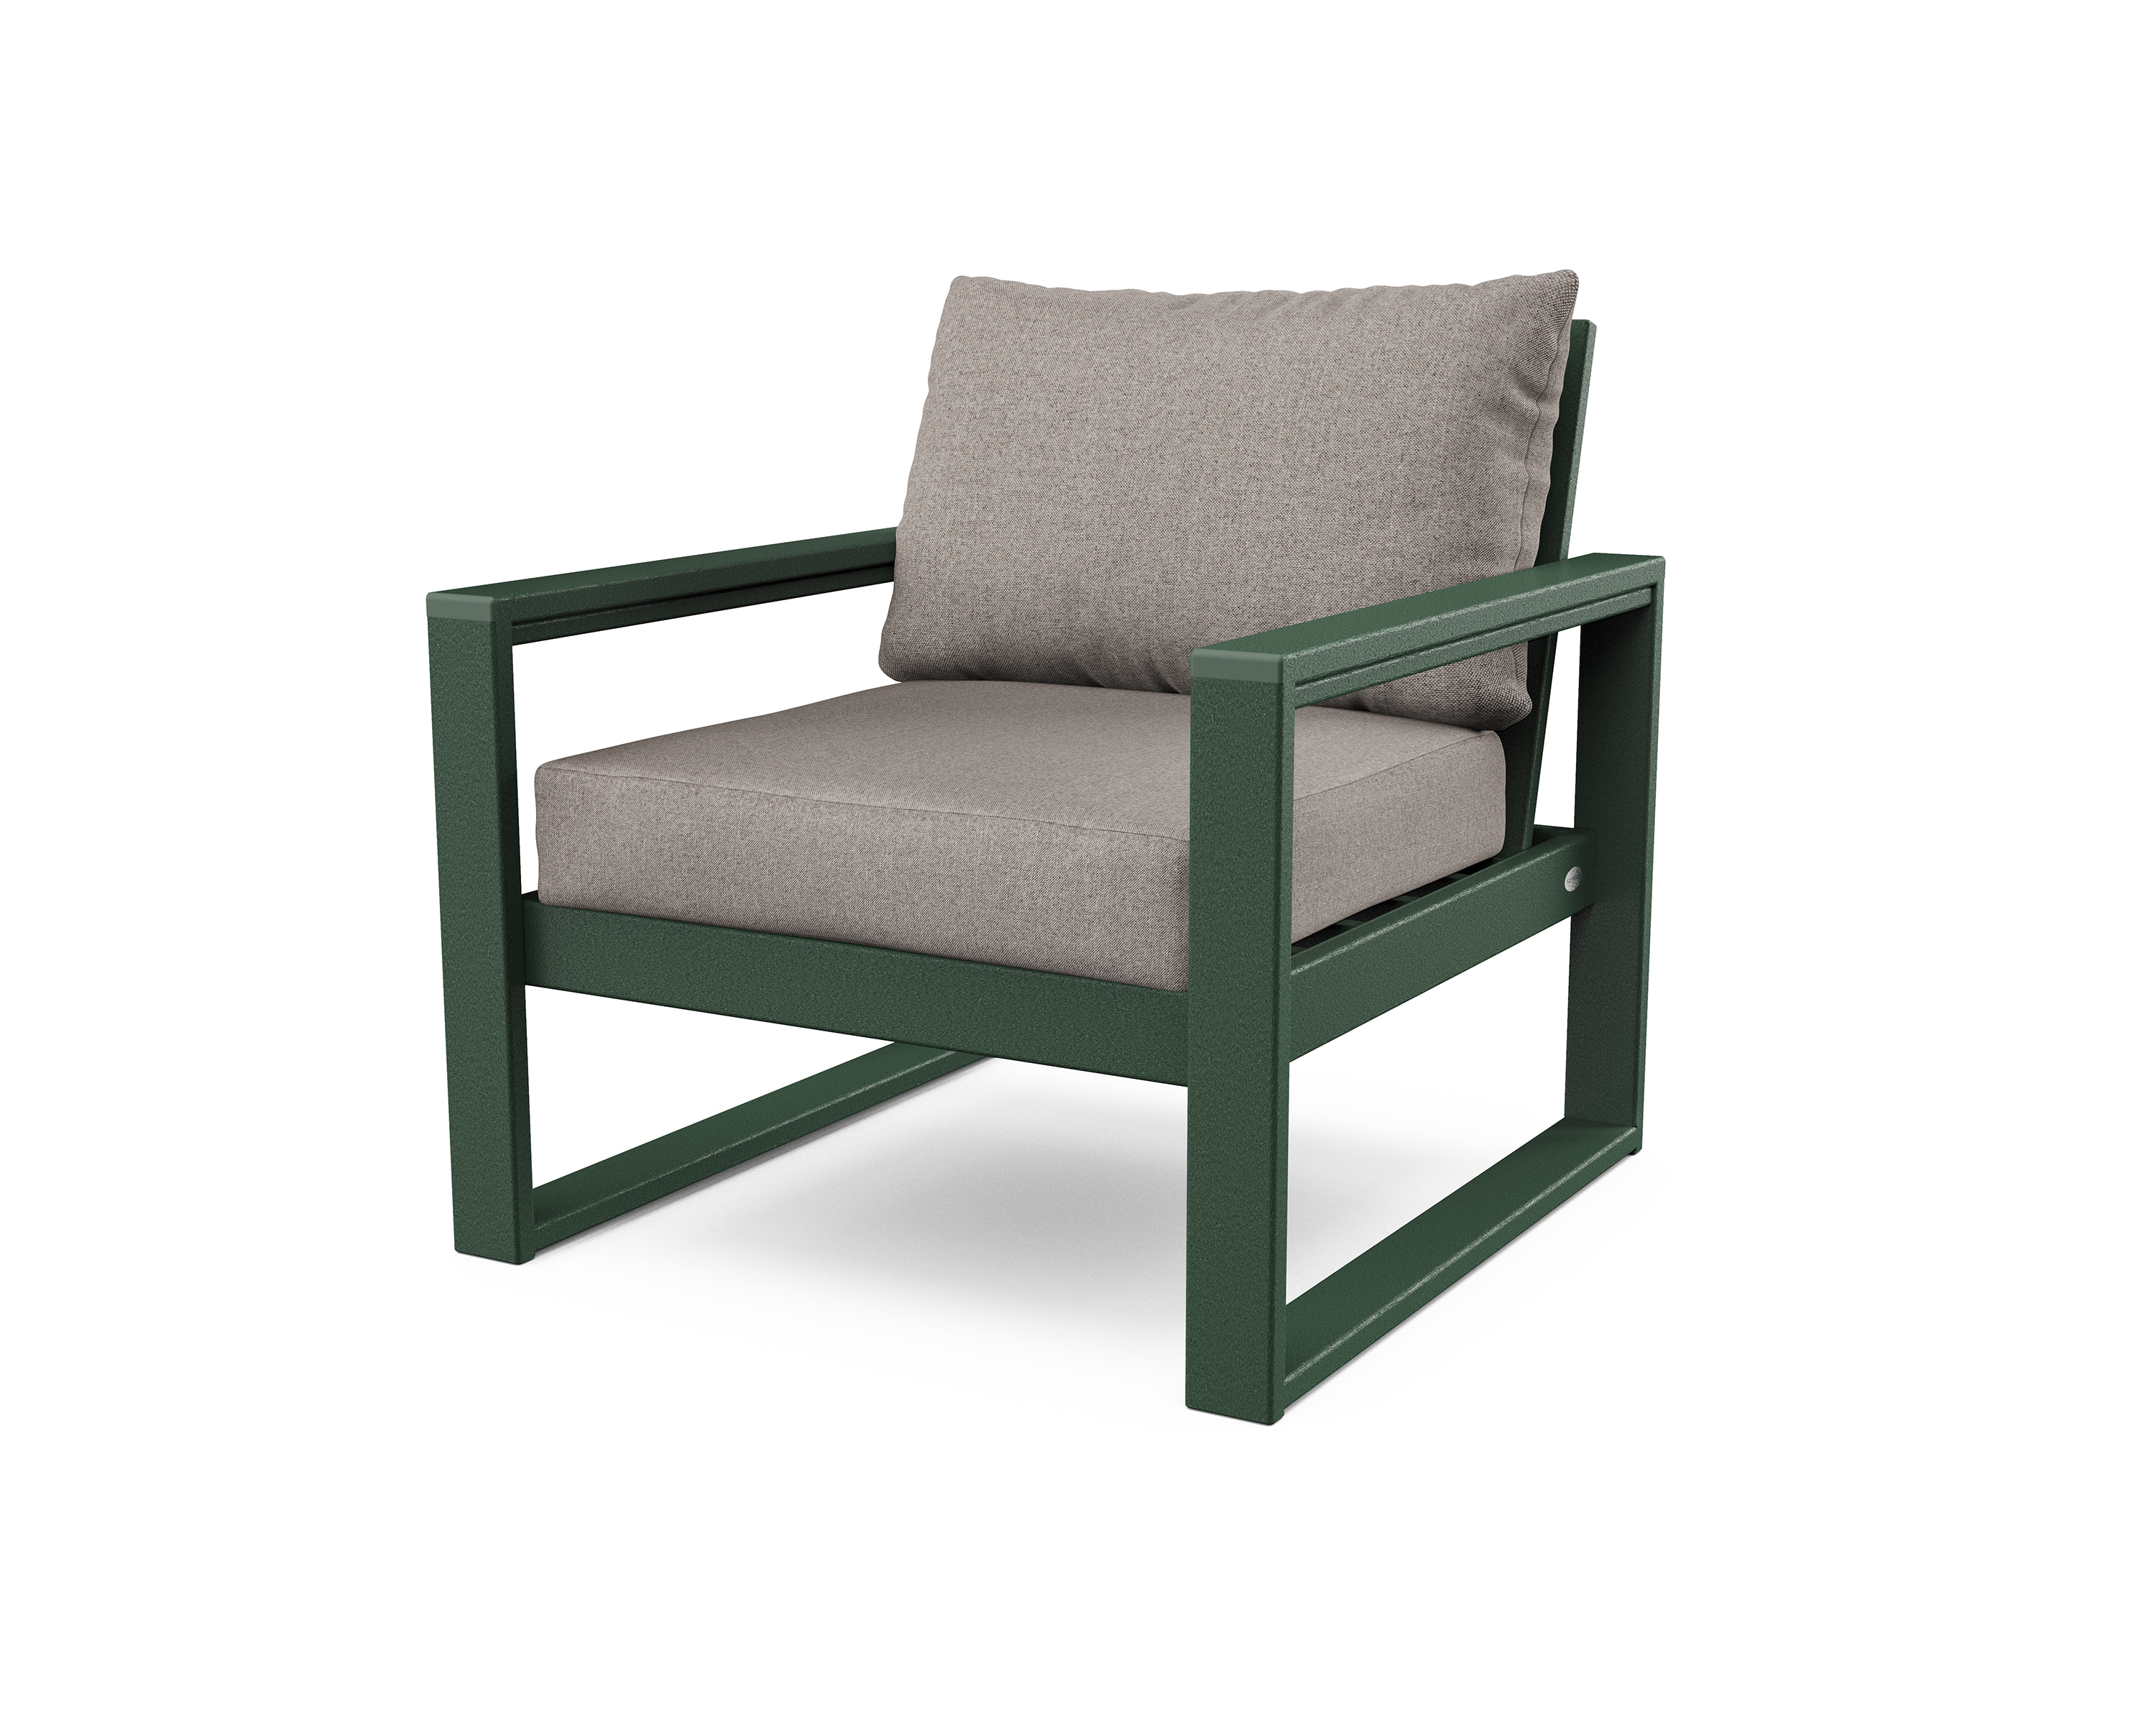 edge club chair in green / weathered tweed product image